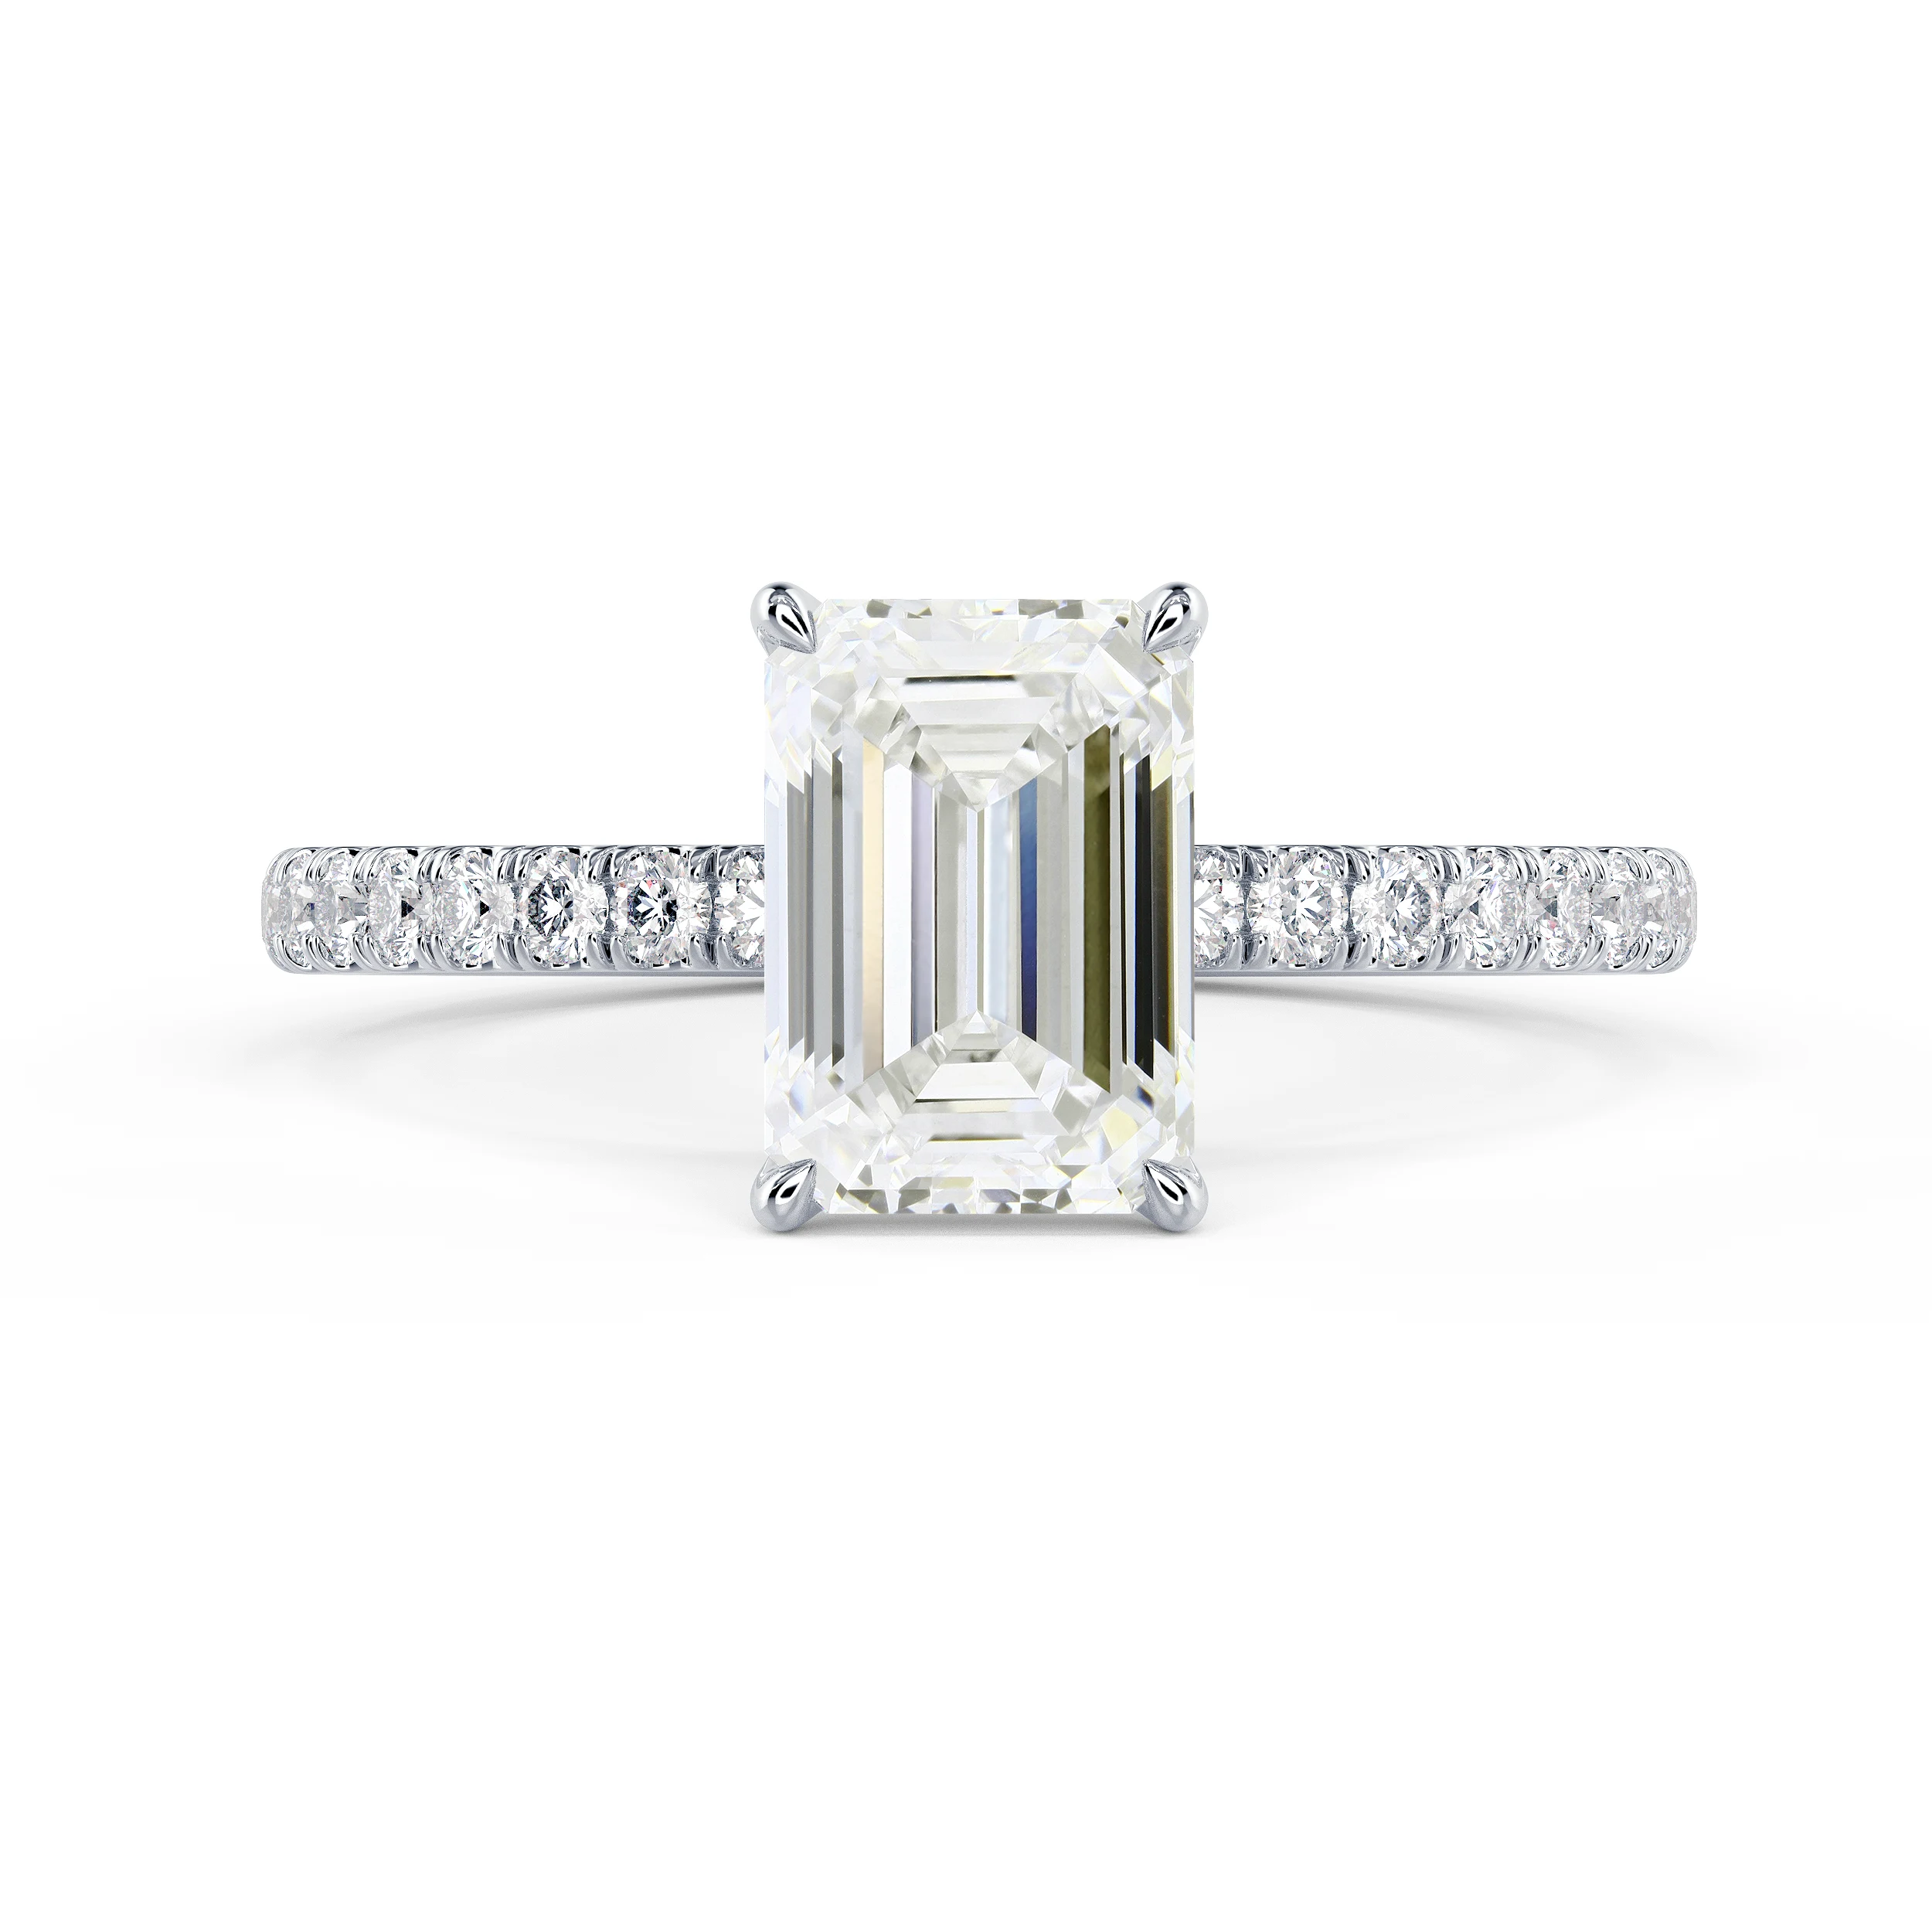 White Gold Emerald Petite Four Prong Pavé Diamond Engagement Ring featuring Synthetic Diamonds (Main View)